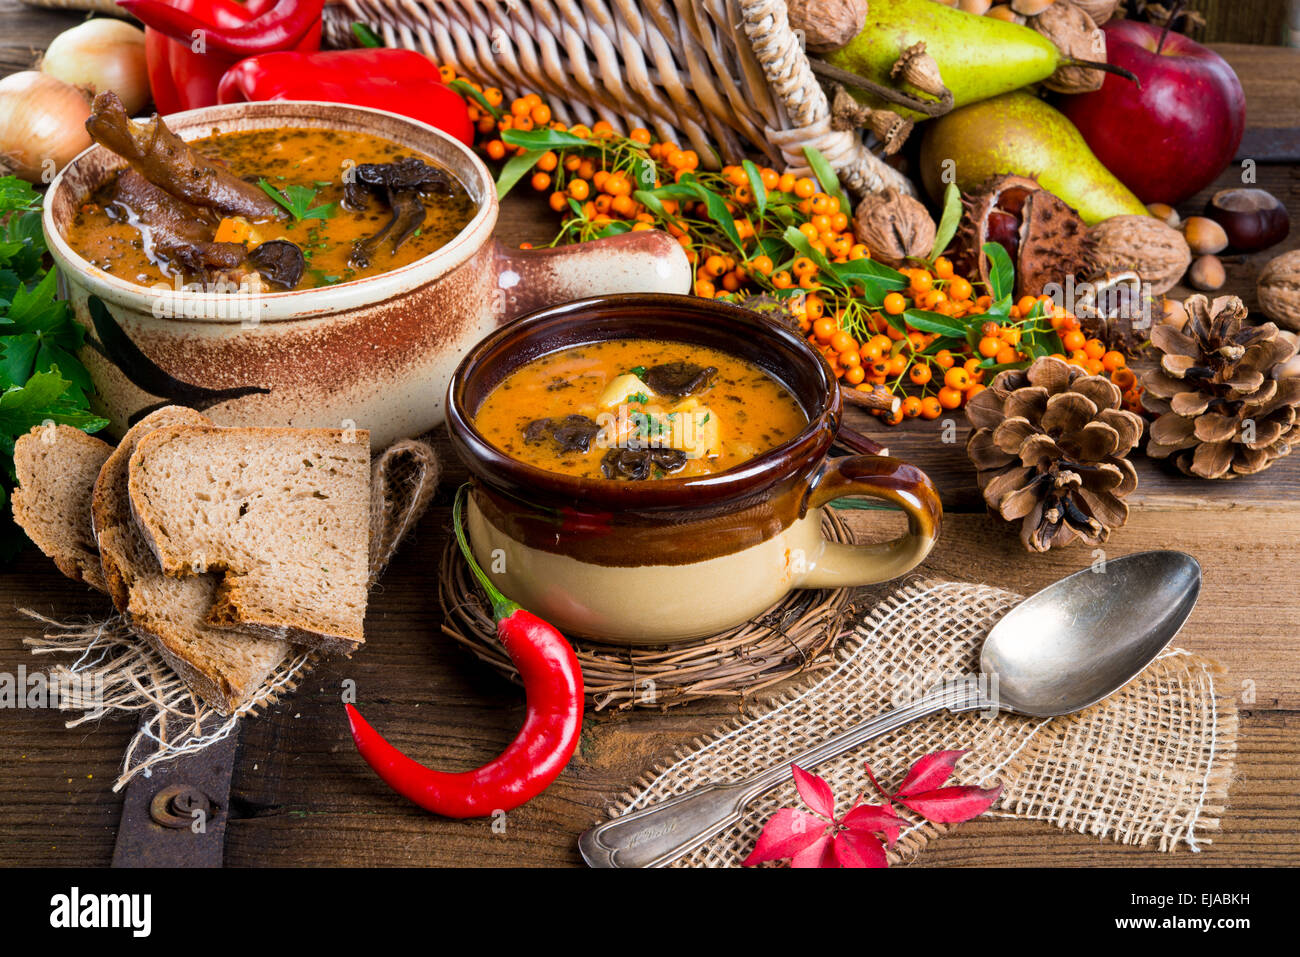 Oxtail soup Stock Photo